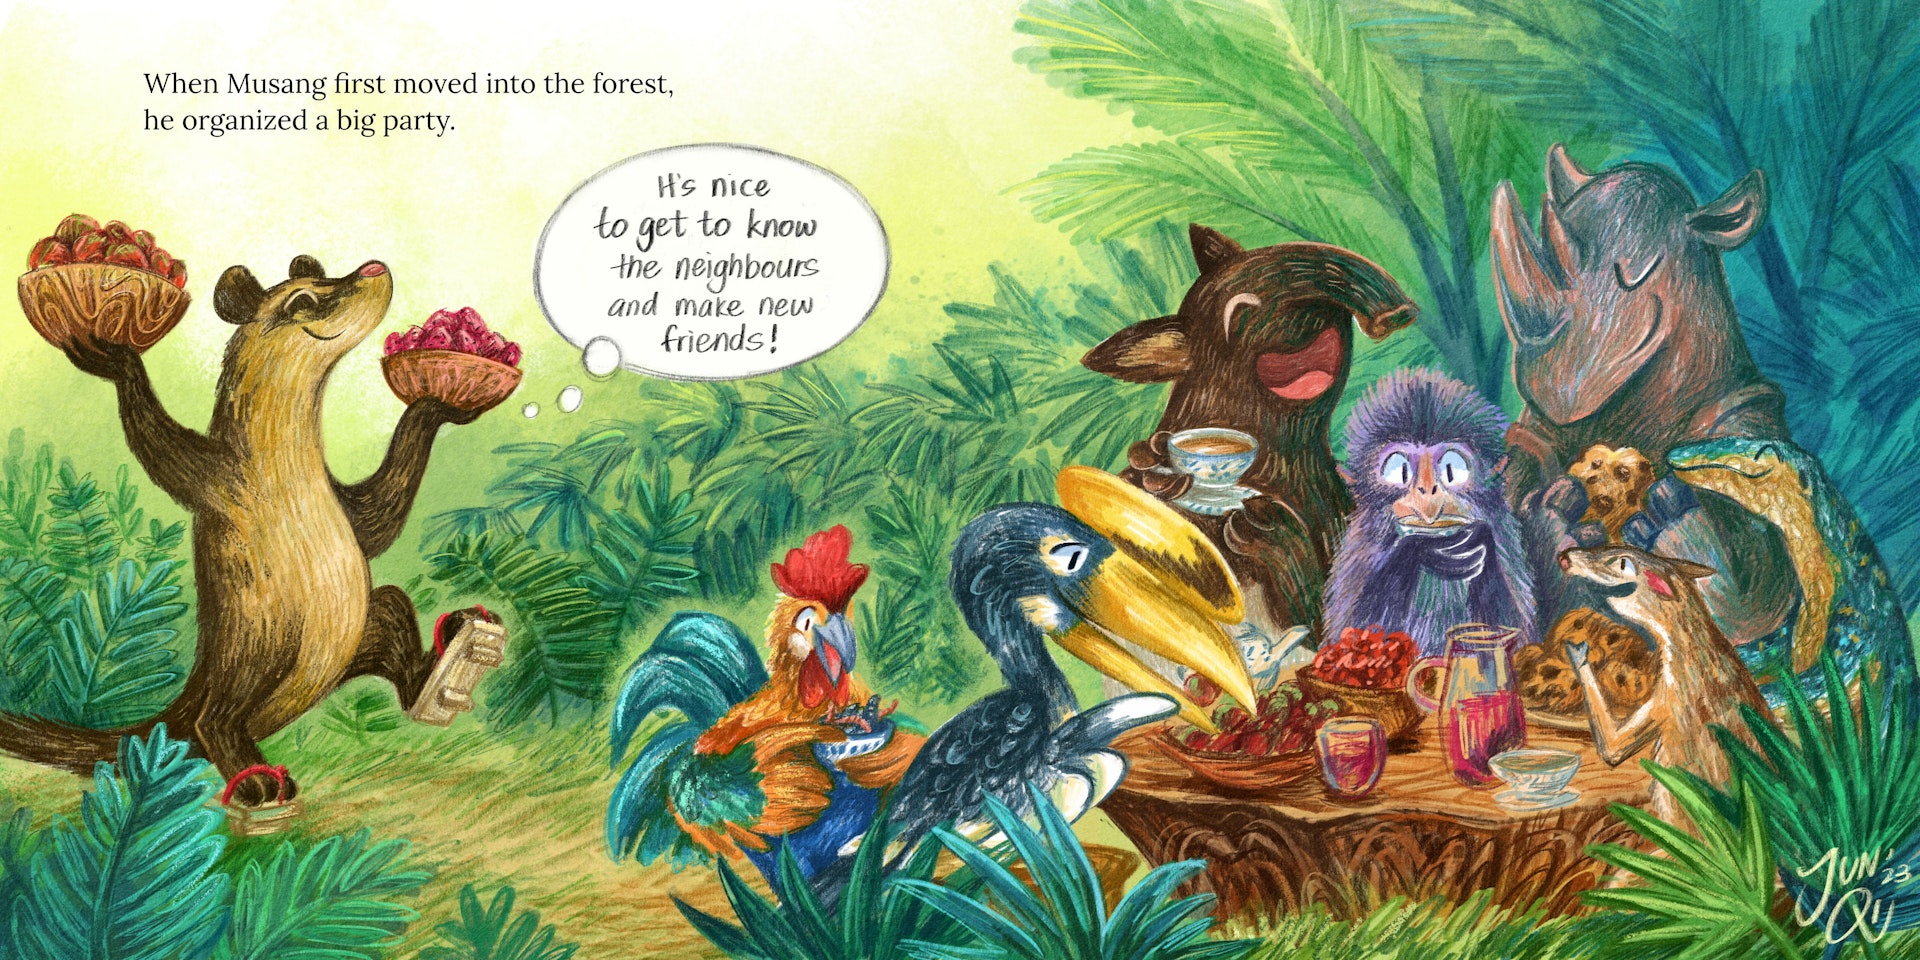 Two page spread illustration showing a musang carrying bowls of fruit to a table seated full of other animals having a tea party in a tropical forest